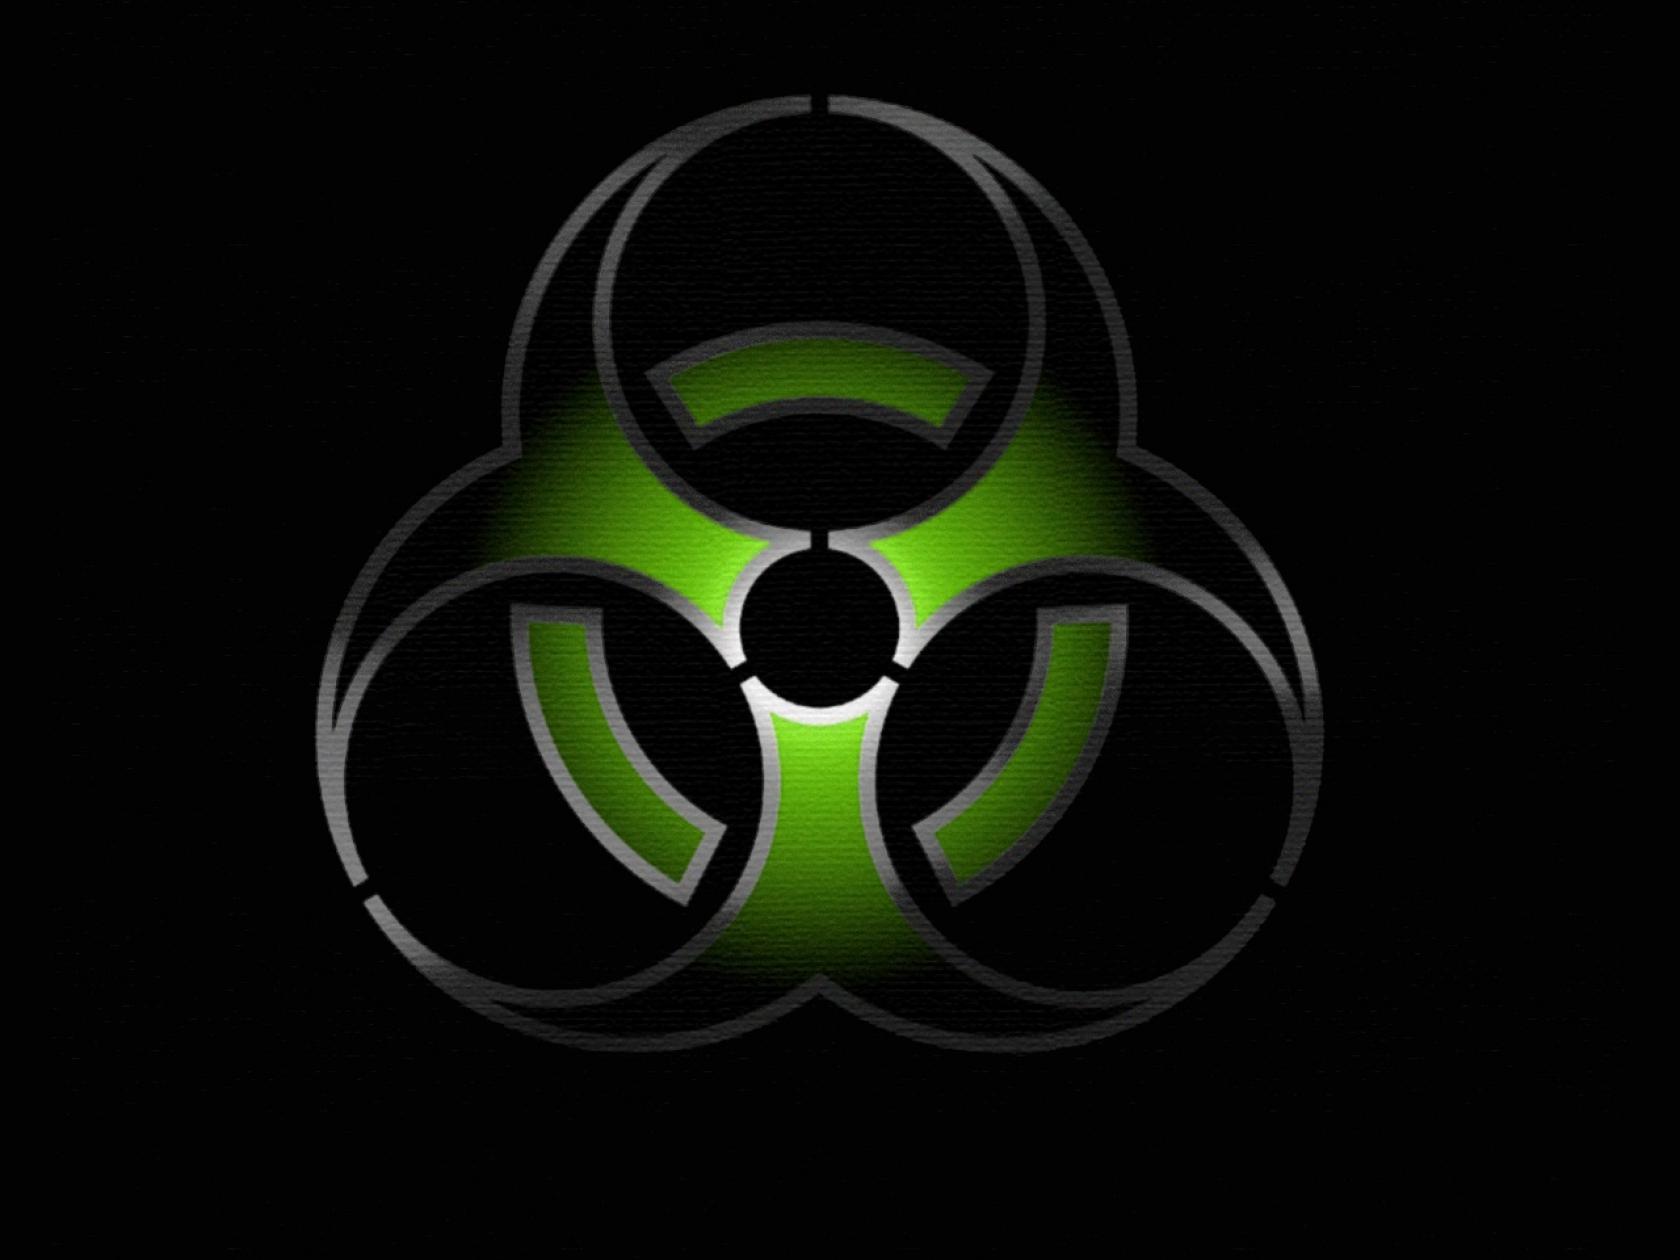 The Biohazard Symbol Meaning*1024 Download Transparent Background Biohazard Icon PNG Download